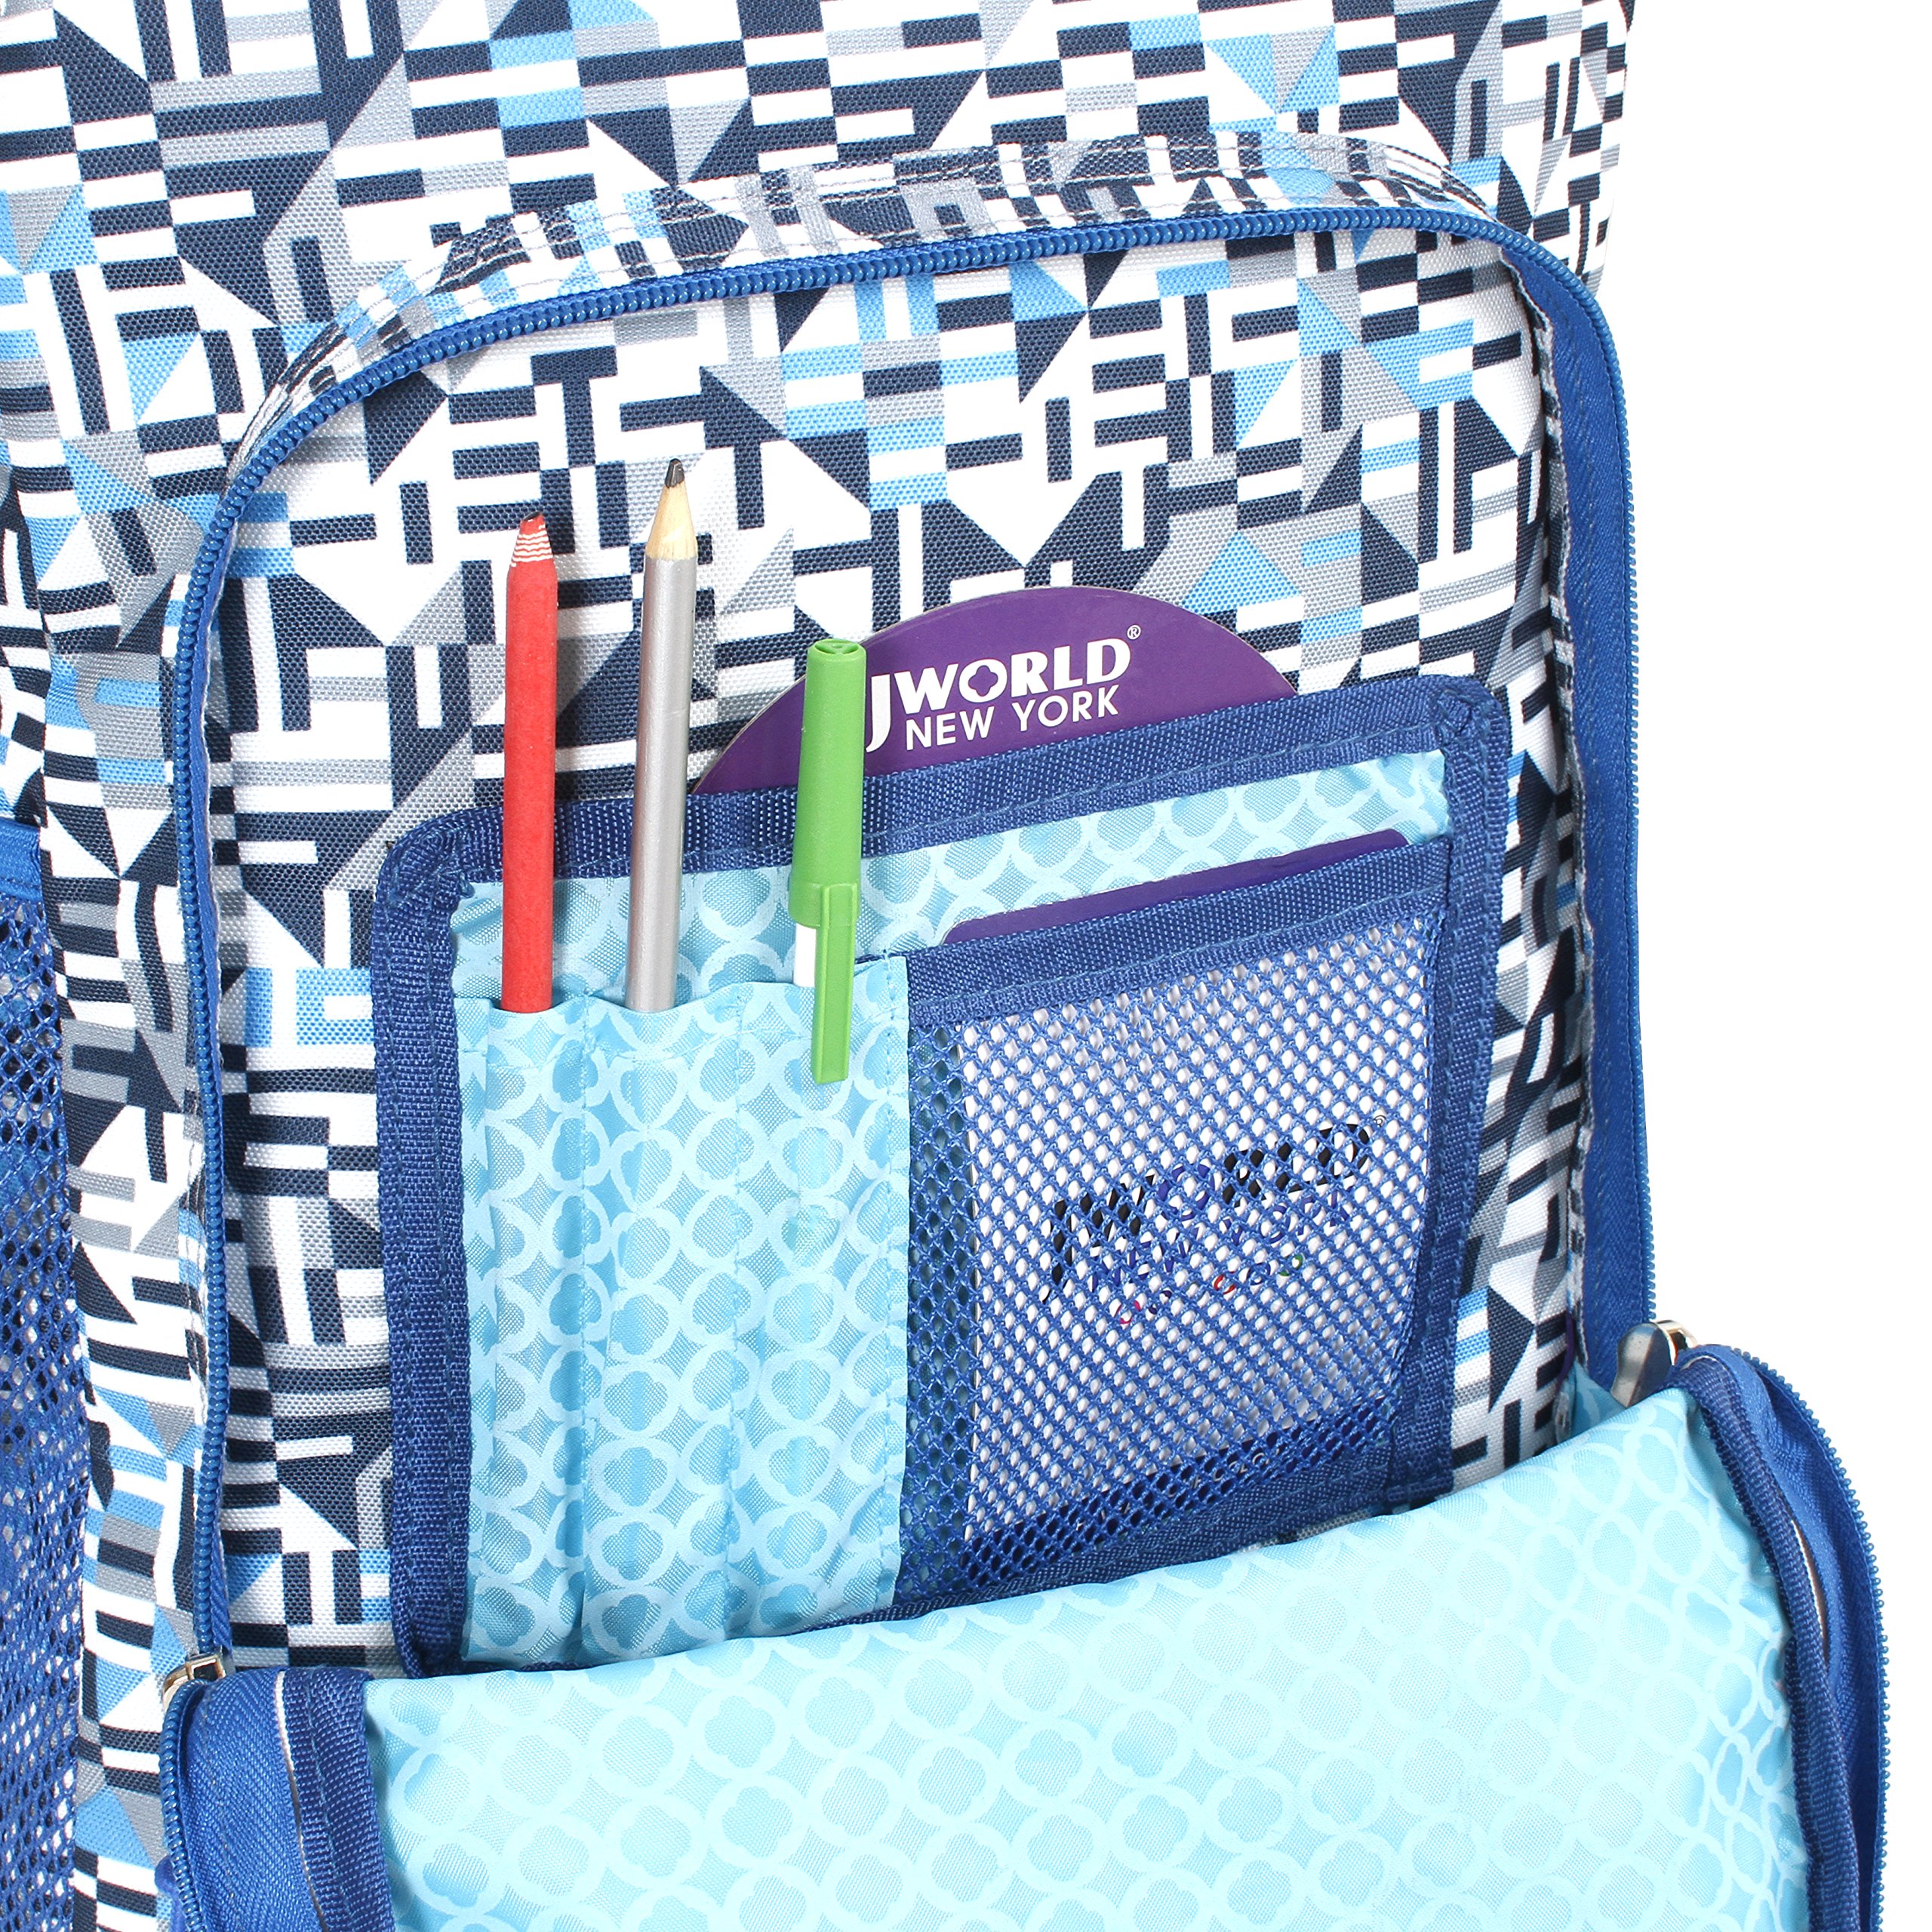 J World New York Sunny Rolling Backpack for Kids and Adults, Geo Blue, 17 X 11.5X 5.5 (H X W X D)